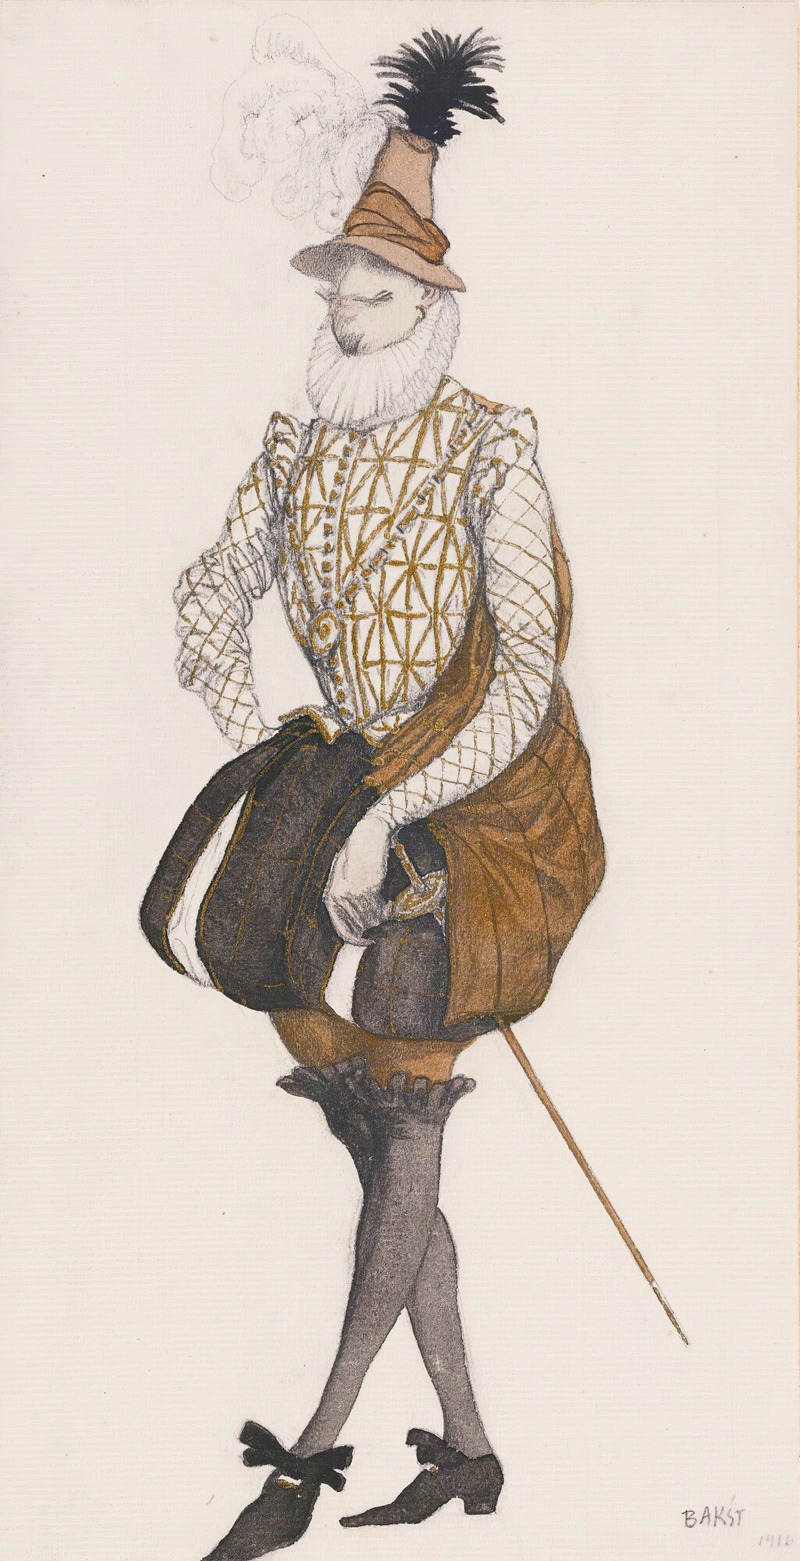 Léon Bakst - Costume Design For Prince Espagnol From The Ballet The Sleeping Beauty